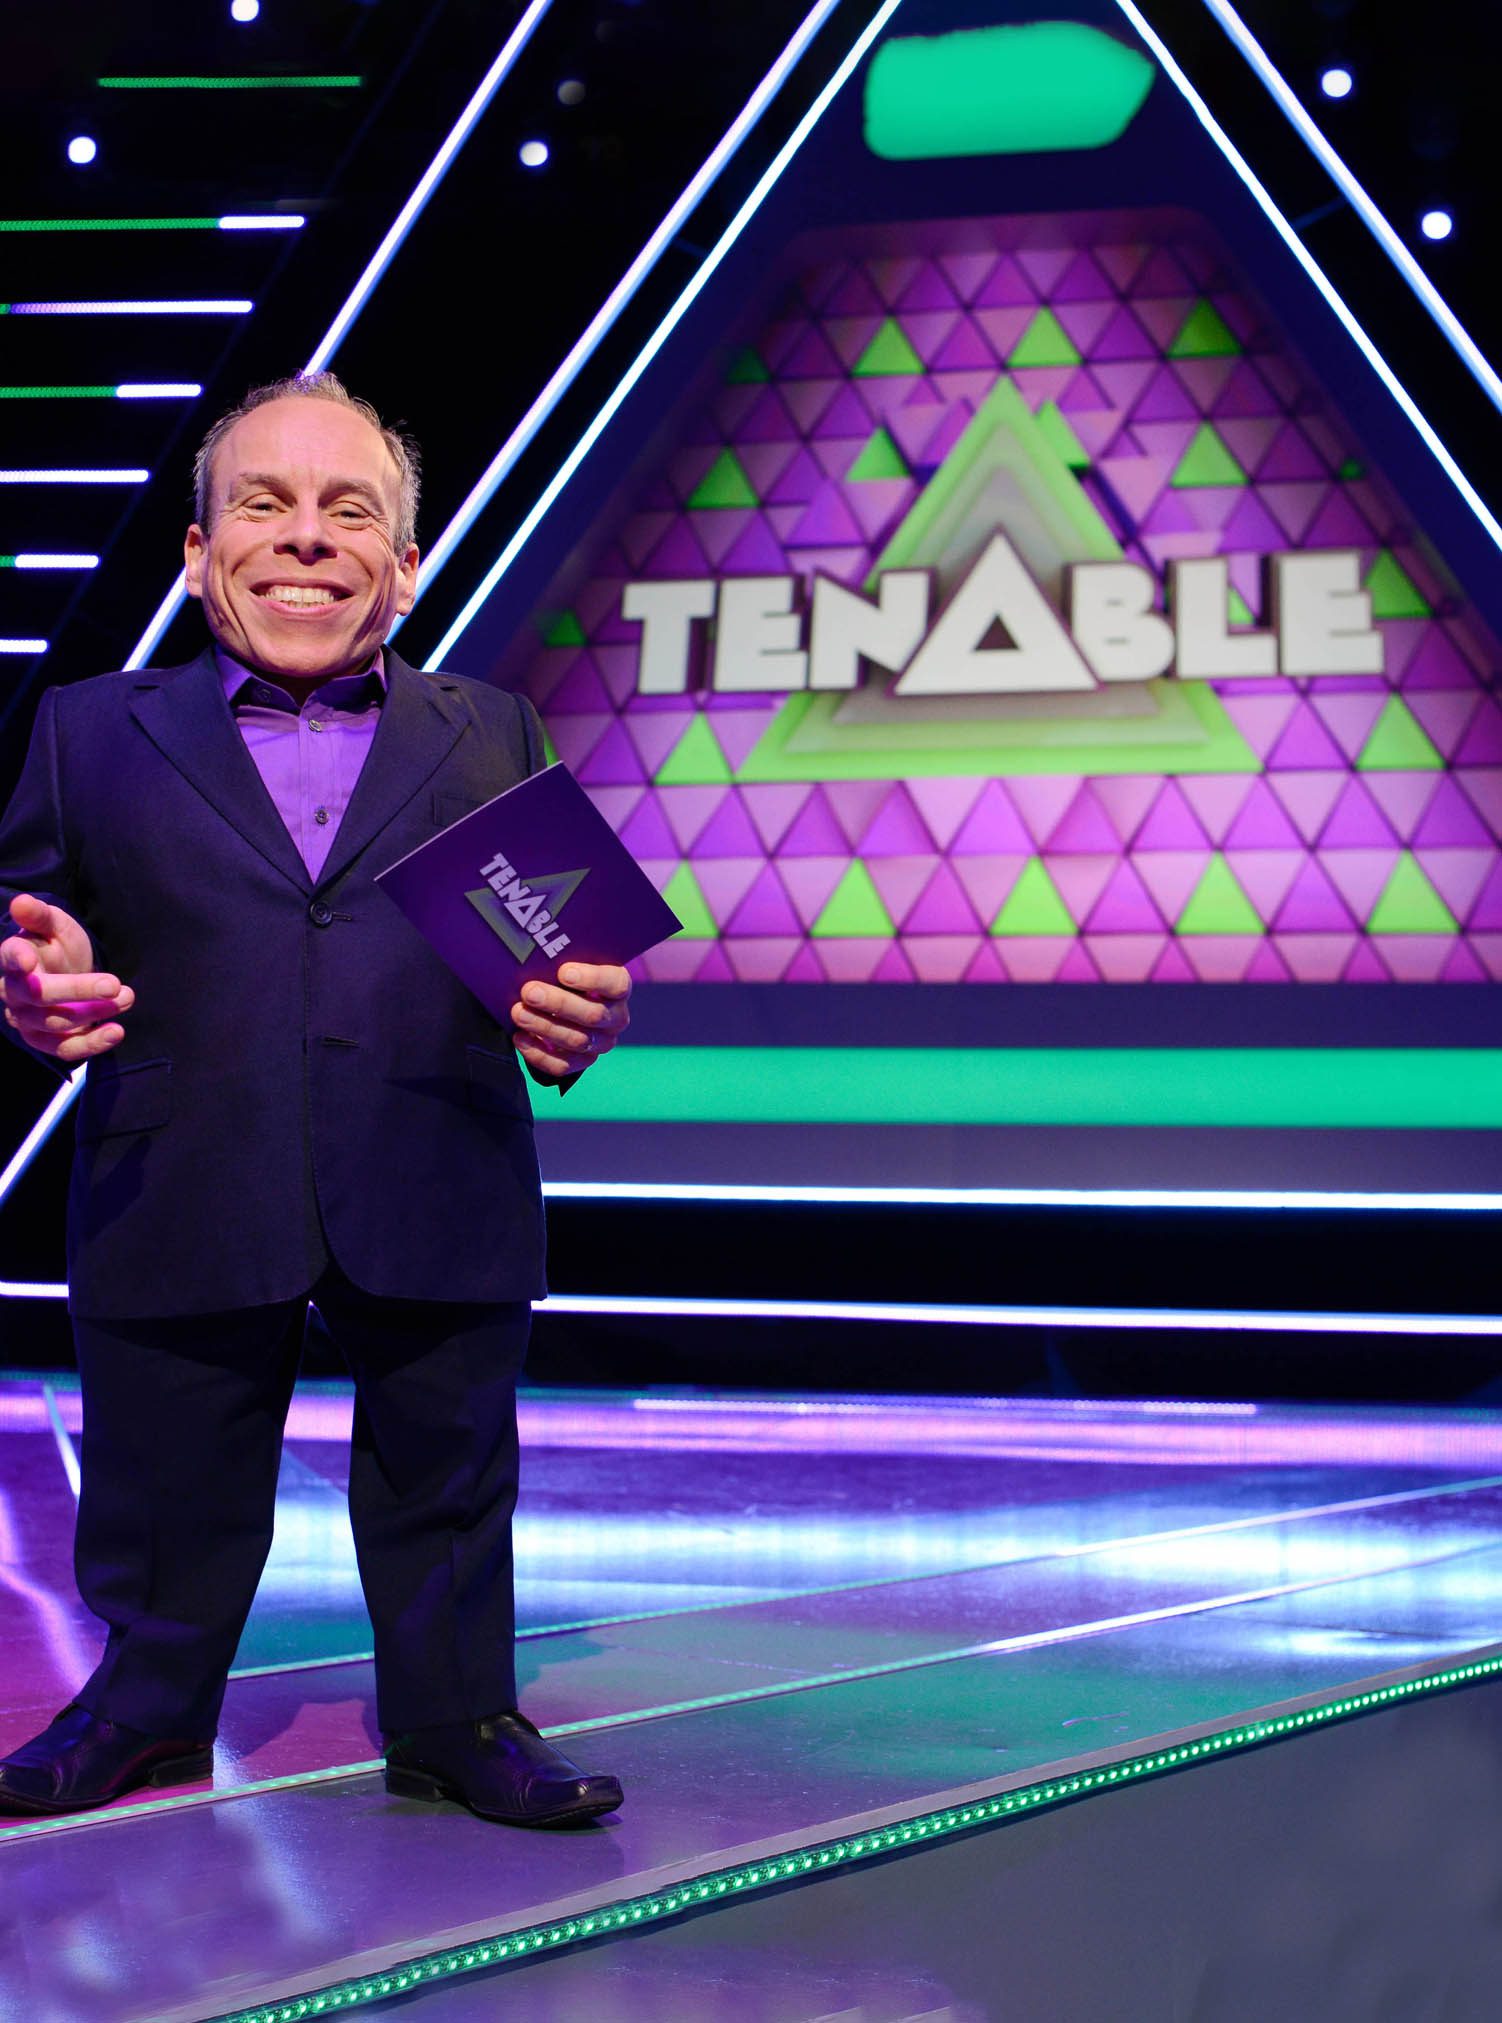 Tenable Season 6 Episode 5: A New Team Tries To Top The Tenable Tower